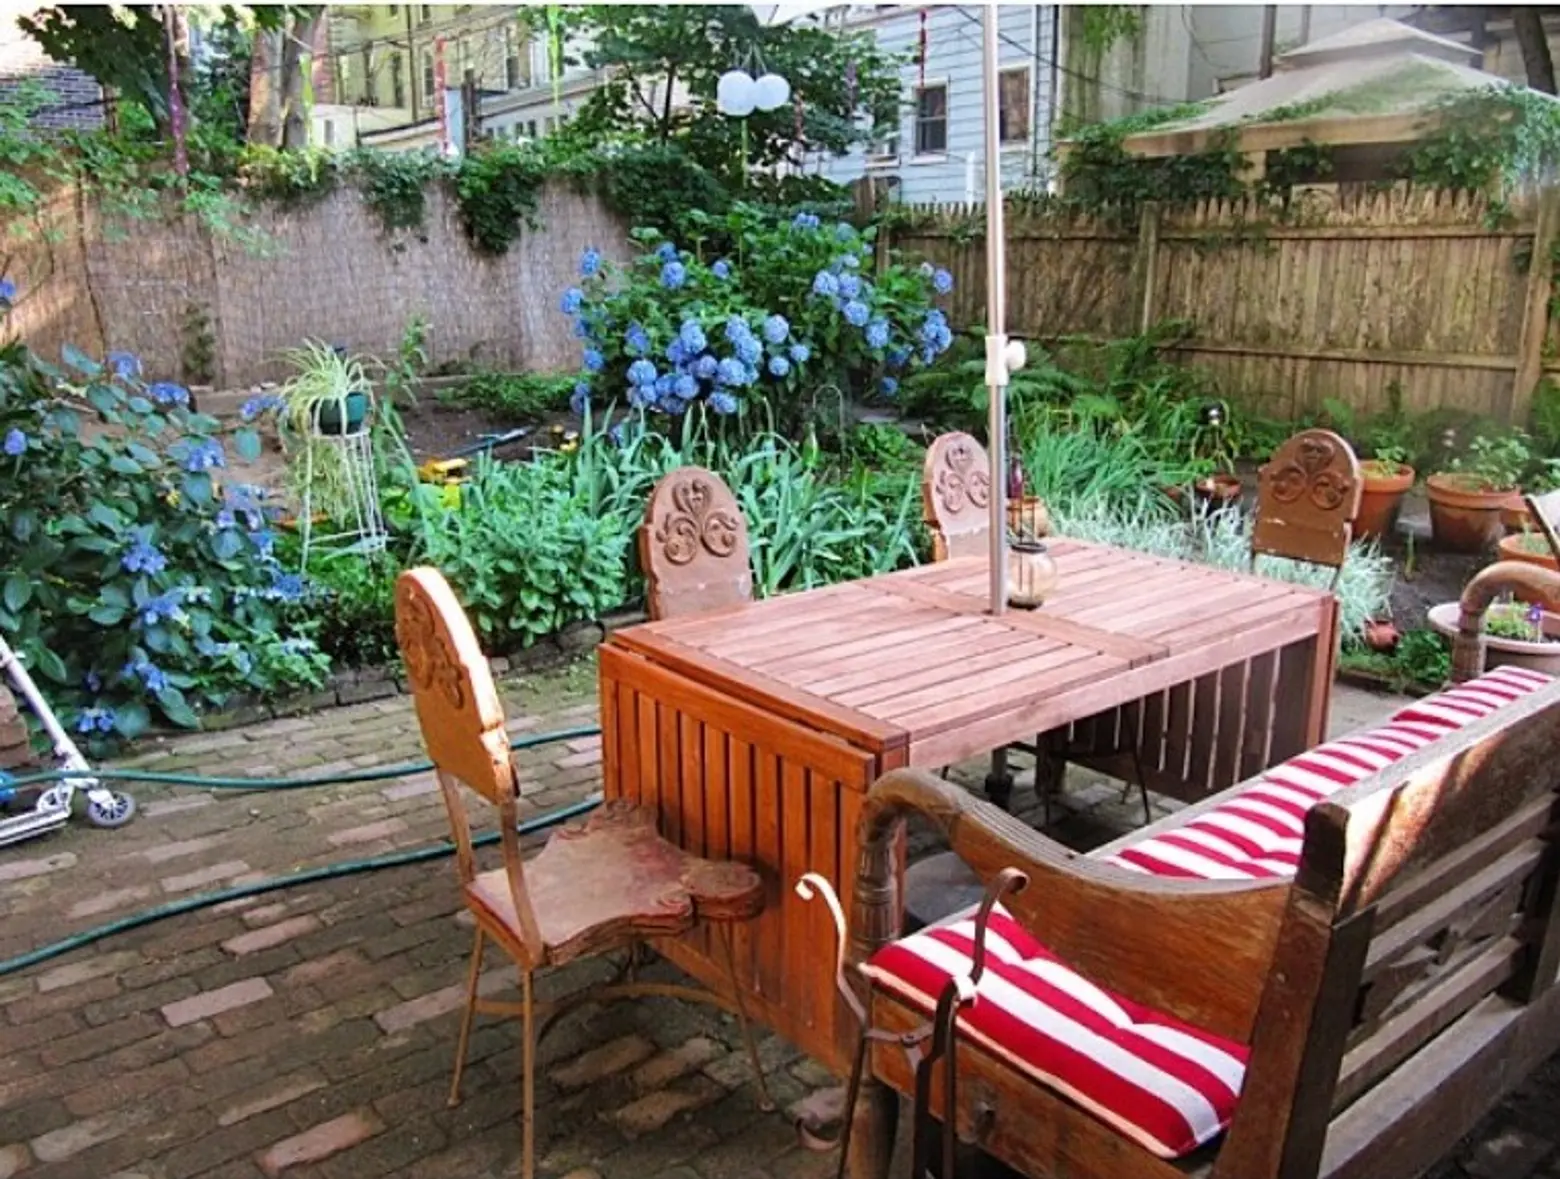 38A Windsor Place, 110 Clinton Avenue, High Low, Clinton Hill, Park Slope, Brooklyn, Cool Listings, Townhouse, Garden